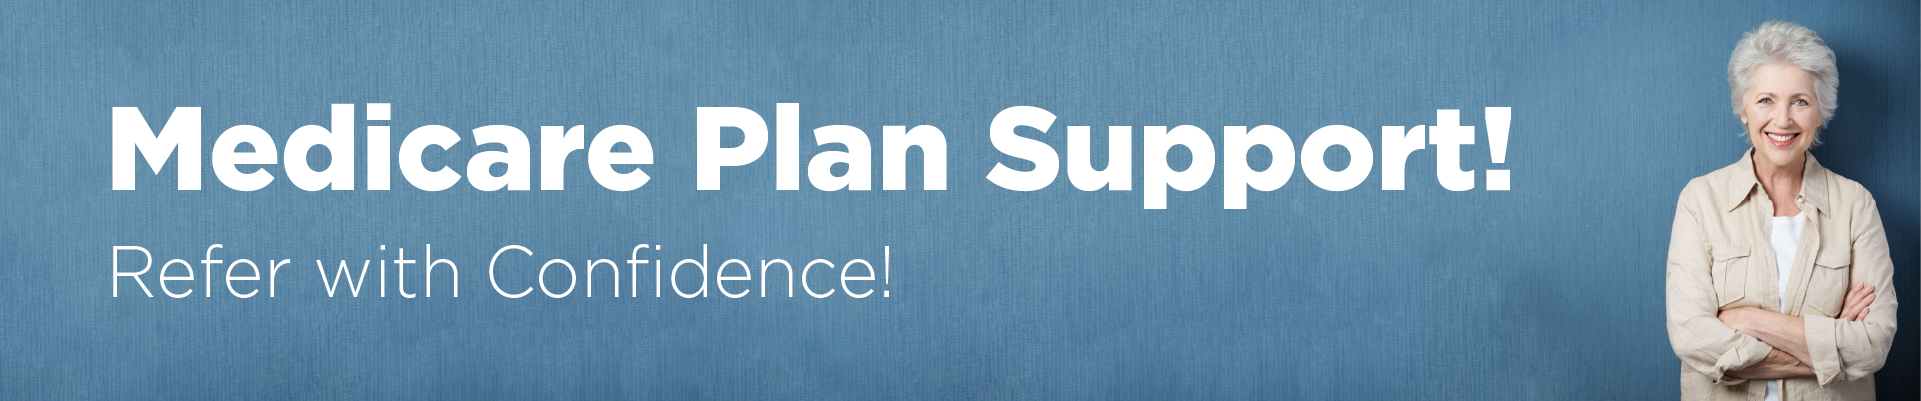 medicare plan support refer with confidence